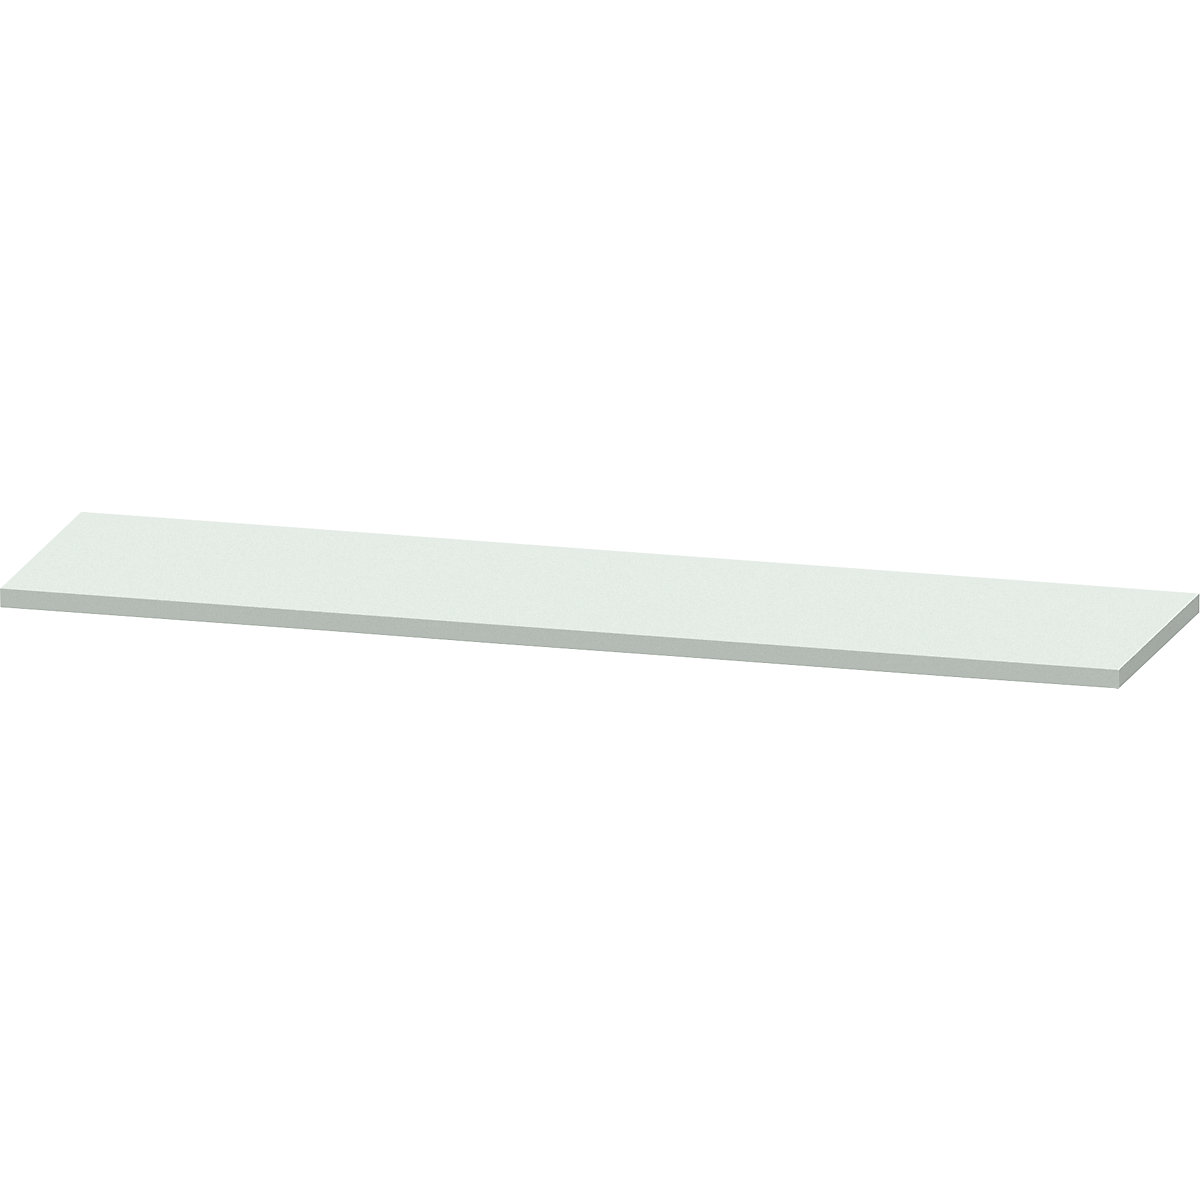 Worktop for workbench – ANKE, sheet steel covered worktop, width 2800 mm, thickness 50 mm-5